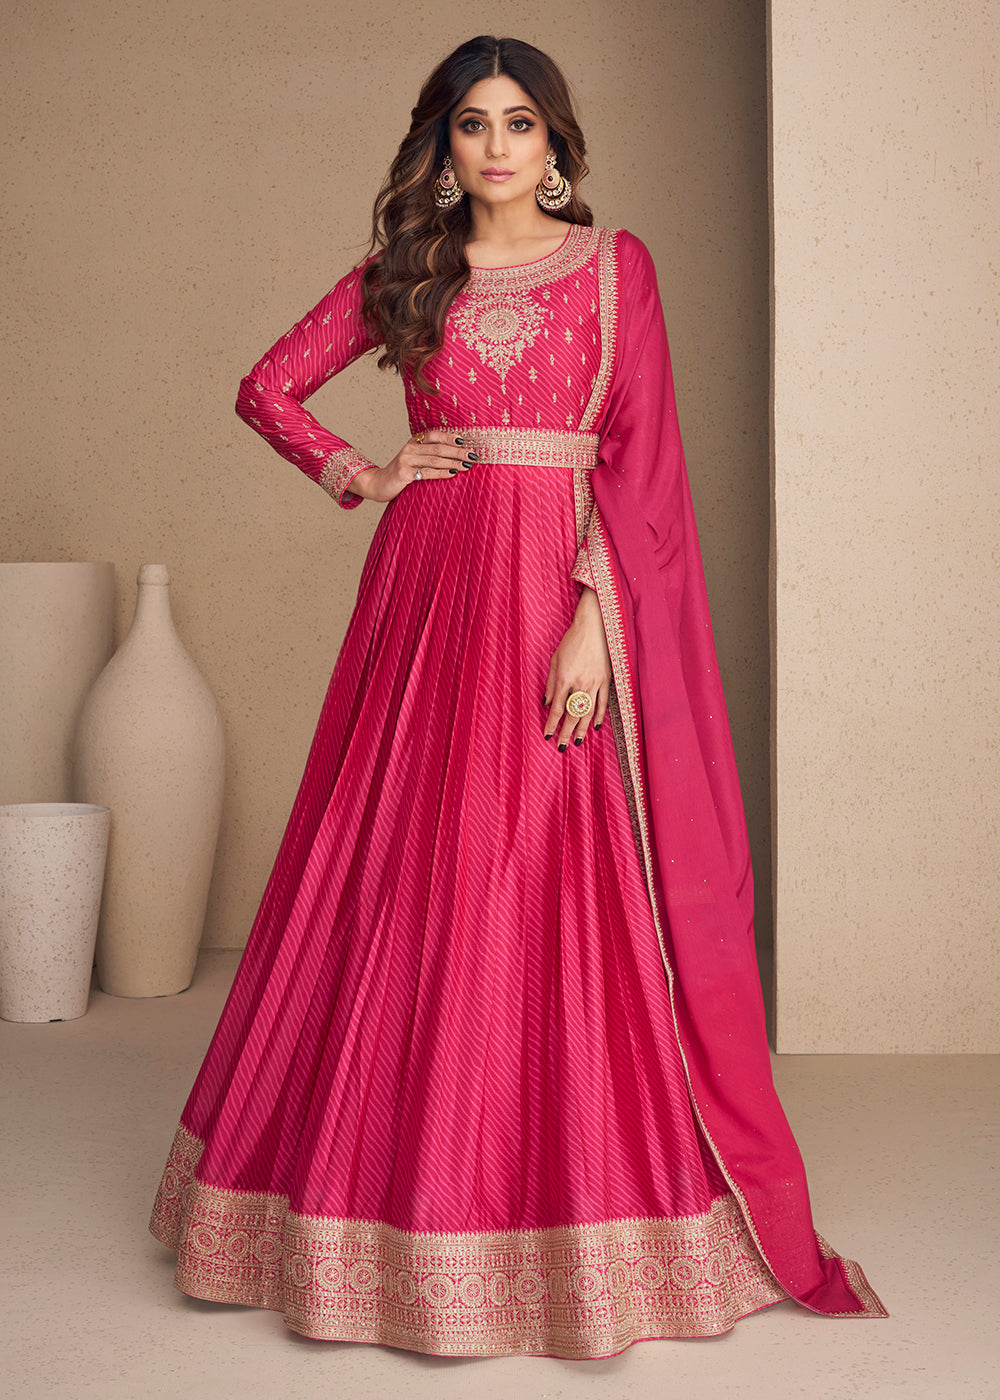 Buy Now Alluring Chinon Silk Pink Embroidered Engagement Wear Anarkali Online in USA, UK, Australia, New Zealand, Canada & Worldwide at Empress Clothing.